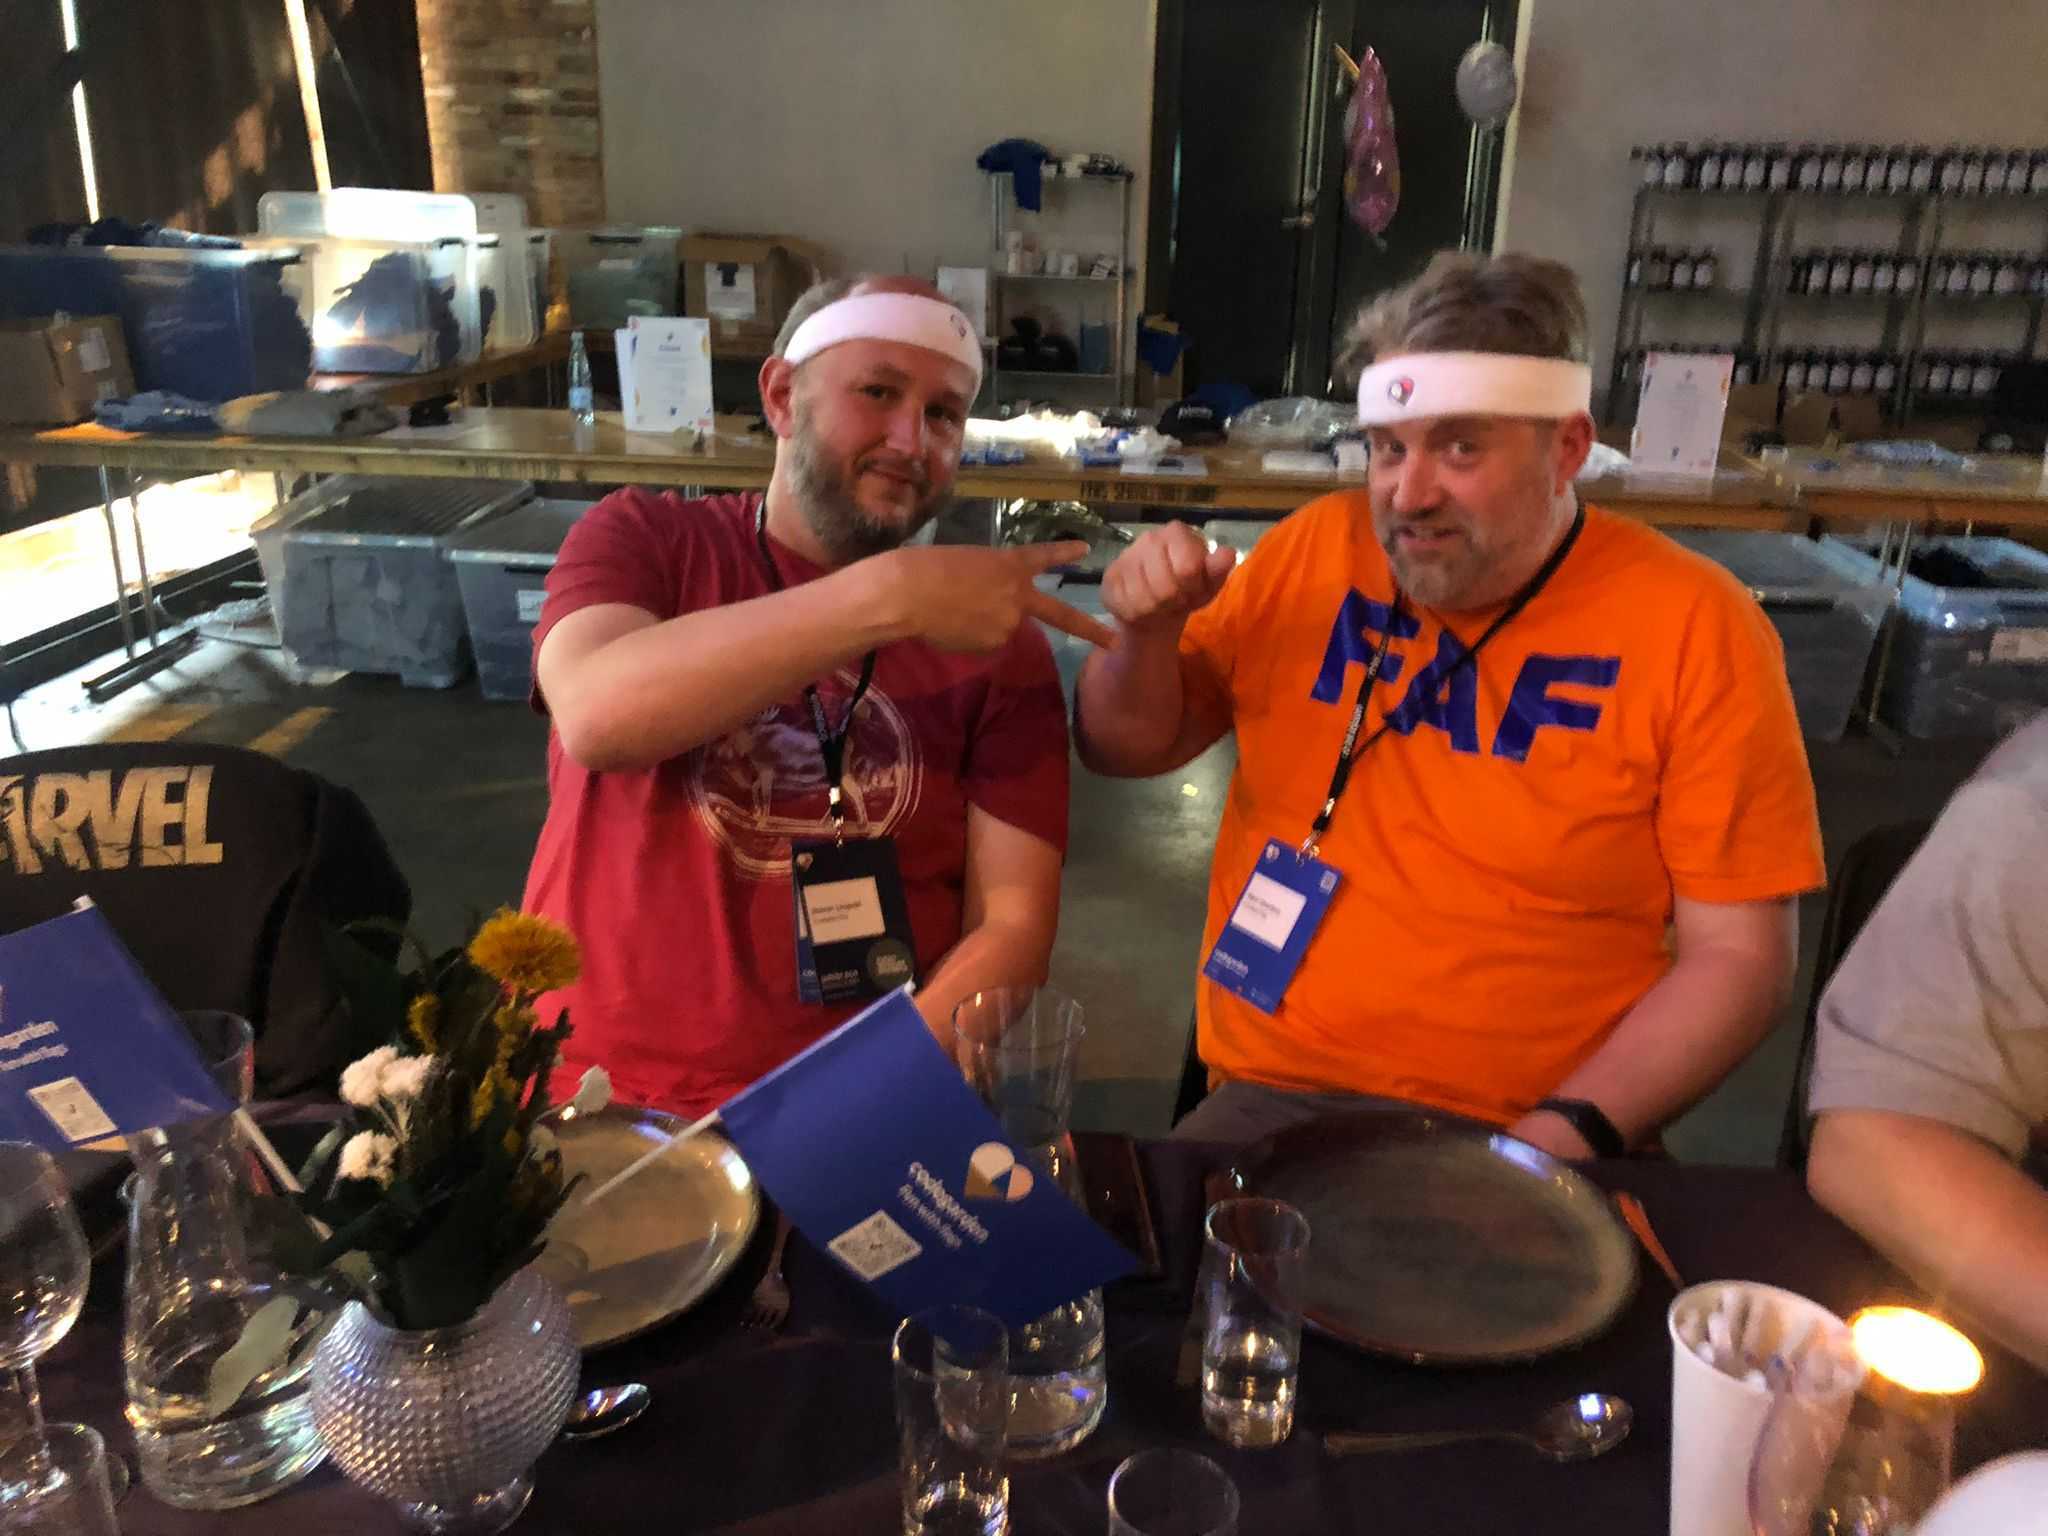 Image of two team members from Crumpled Dog, both wearing sports-style sweatbands. One of them is making the shape of scissors with his hands, and the other is making a rock shape, for a game of rock, paper, scissors.